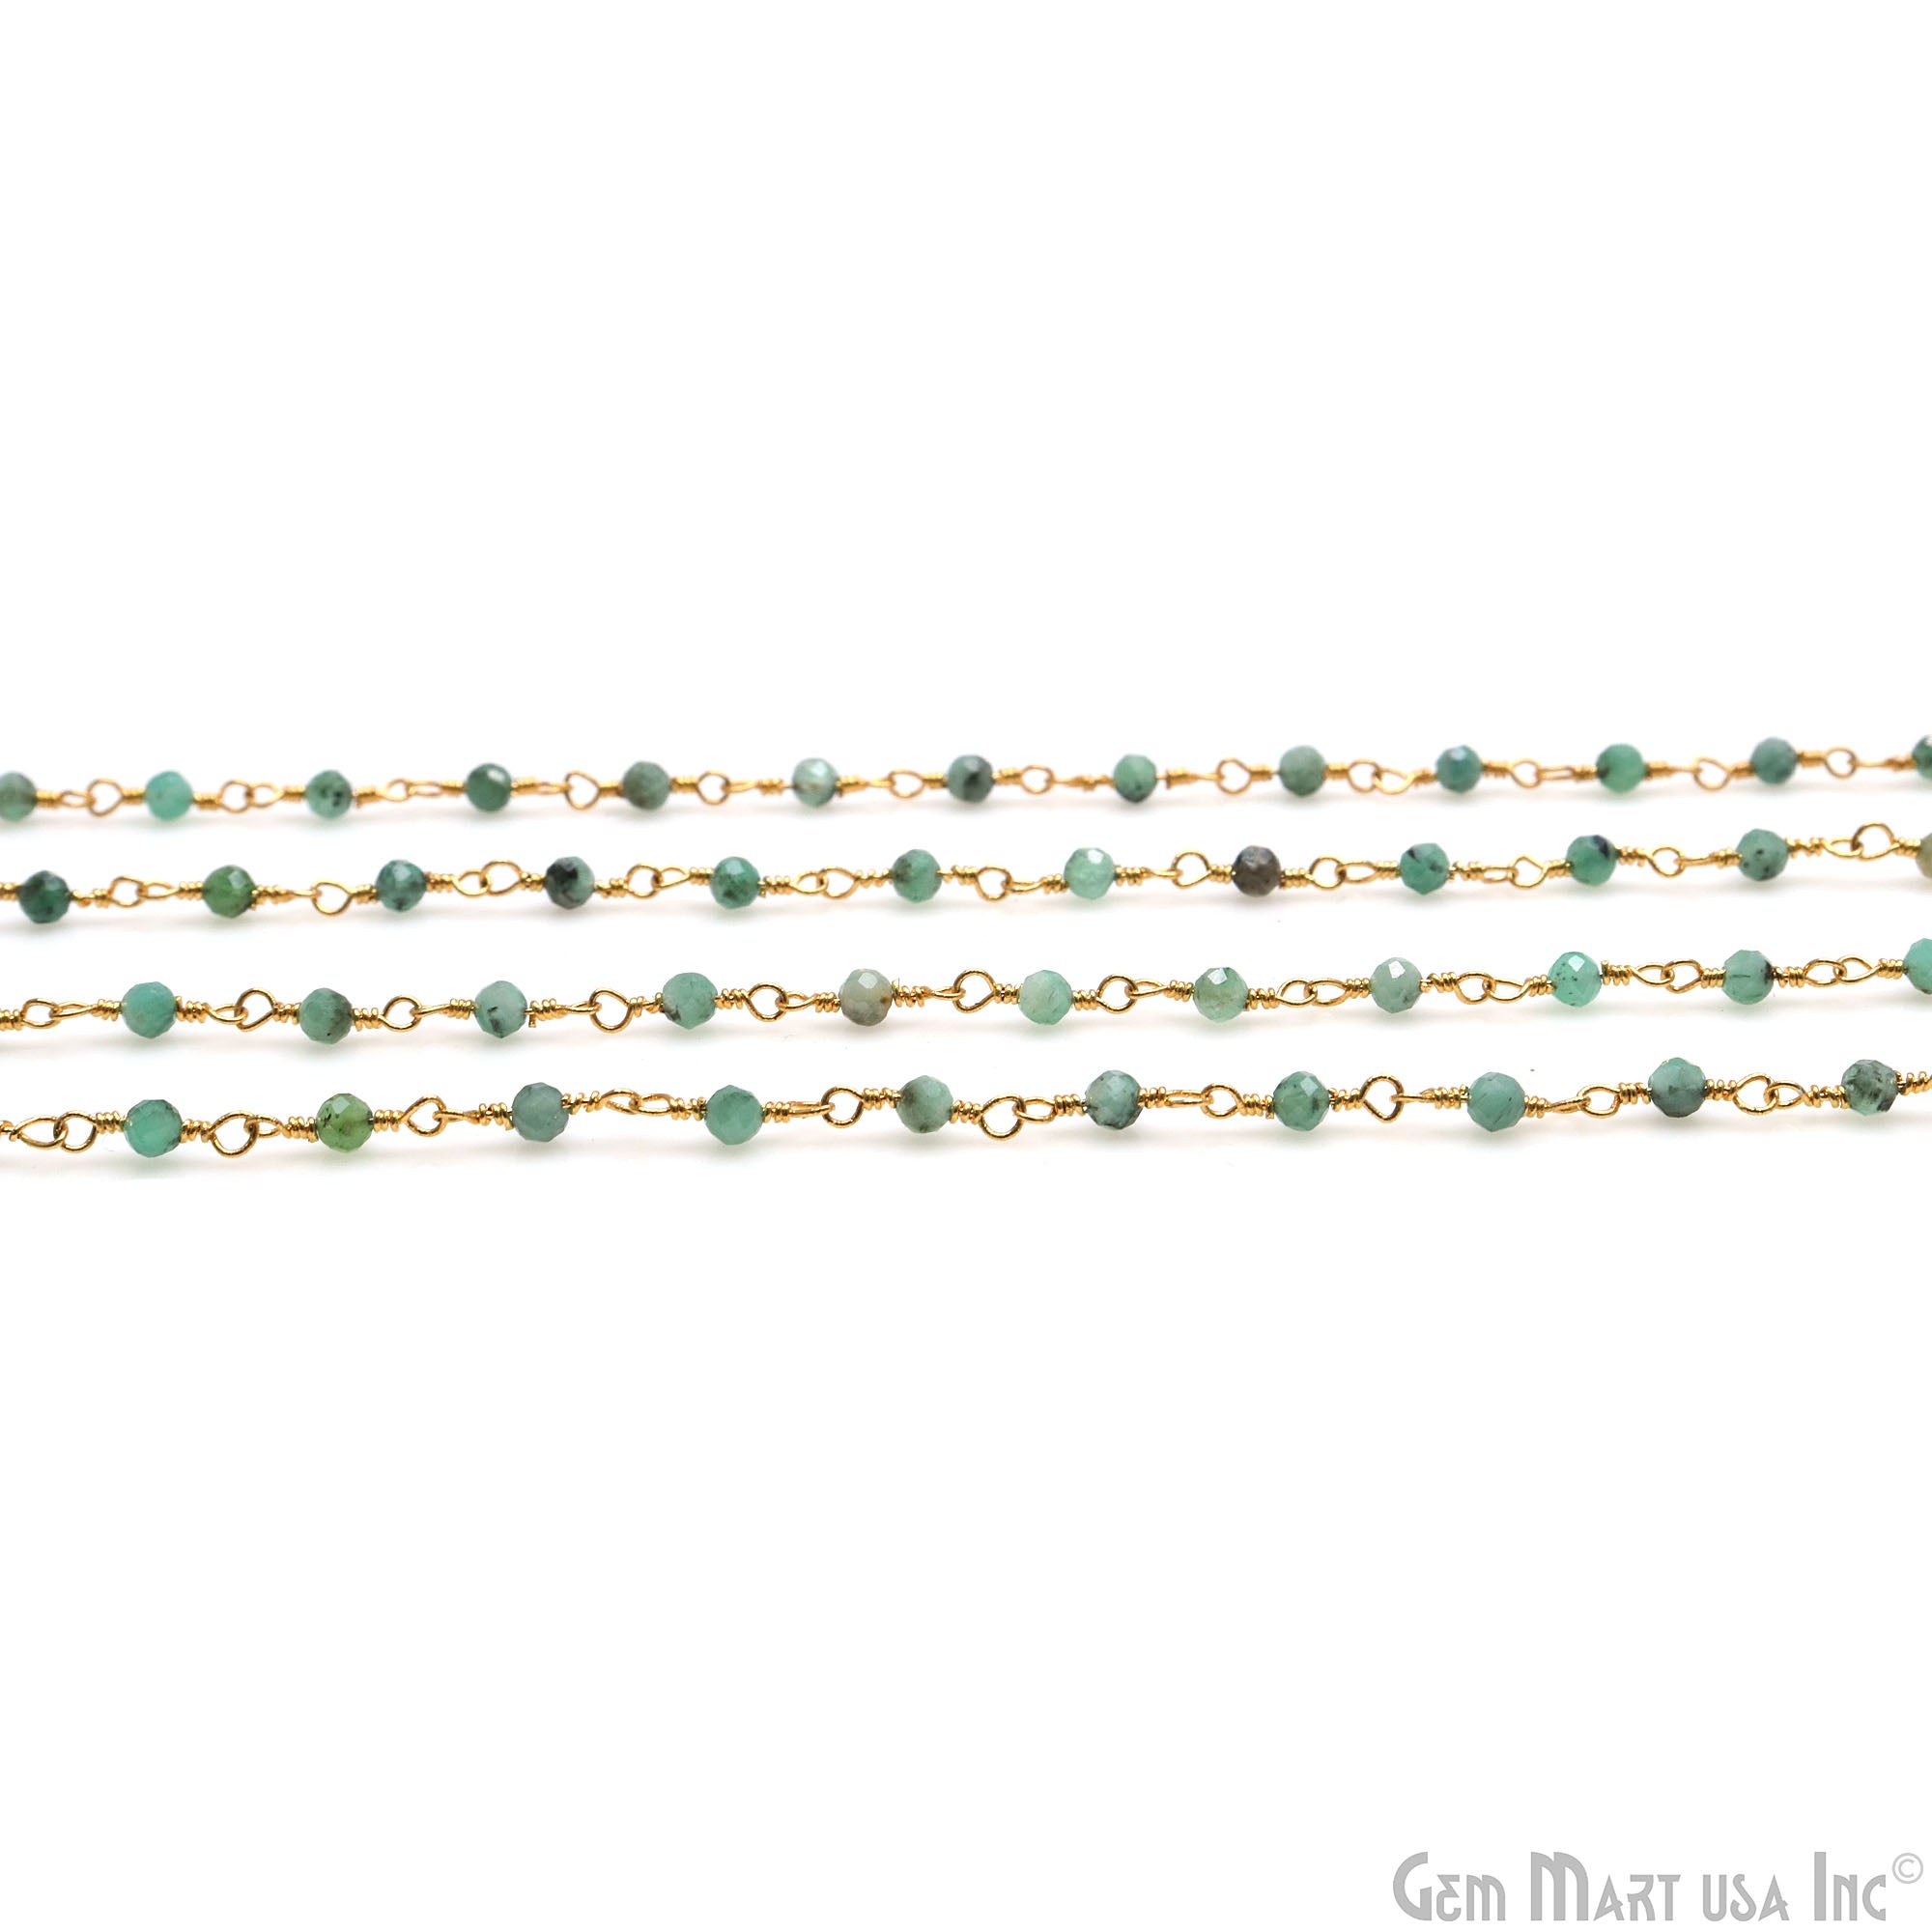 Emerald Faceted 2-2.5mm Tiny Beads Gold Plated Wire Wrapped Rosary Chain